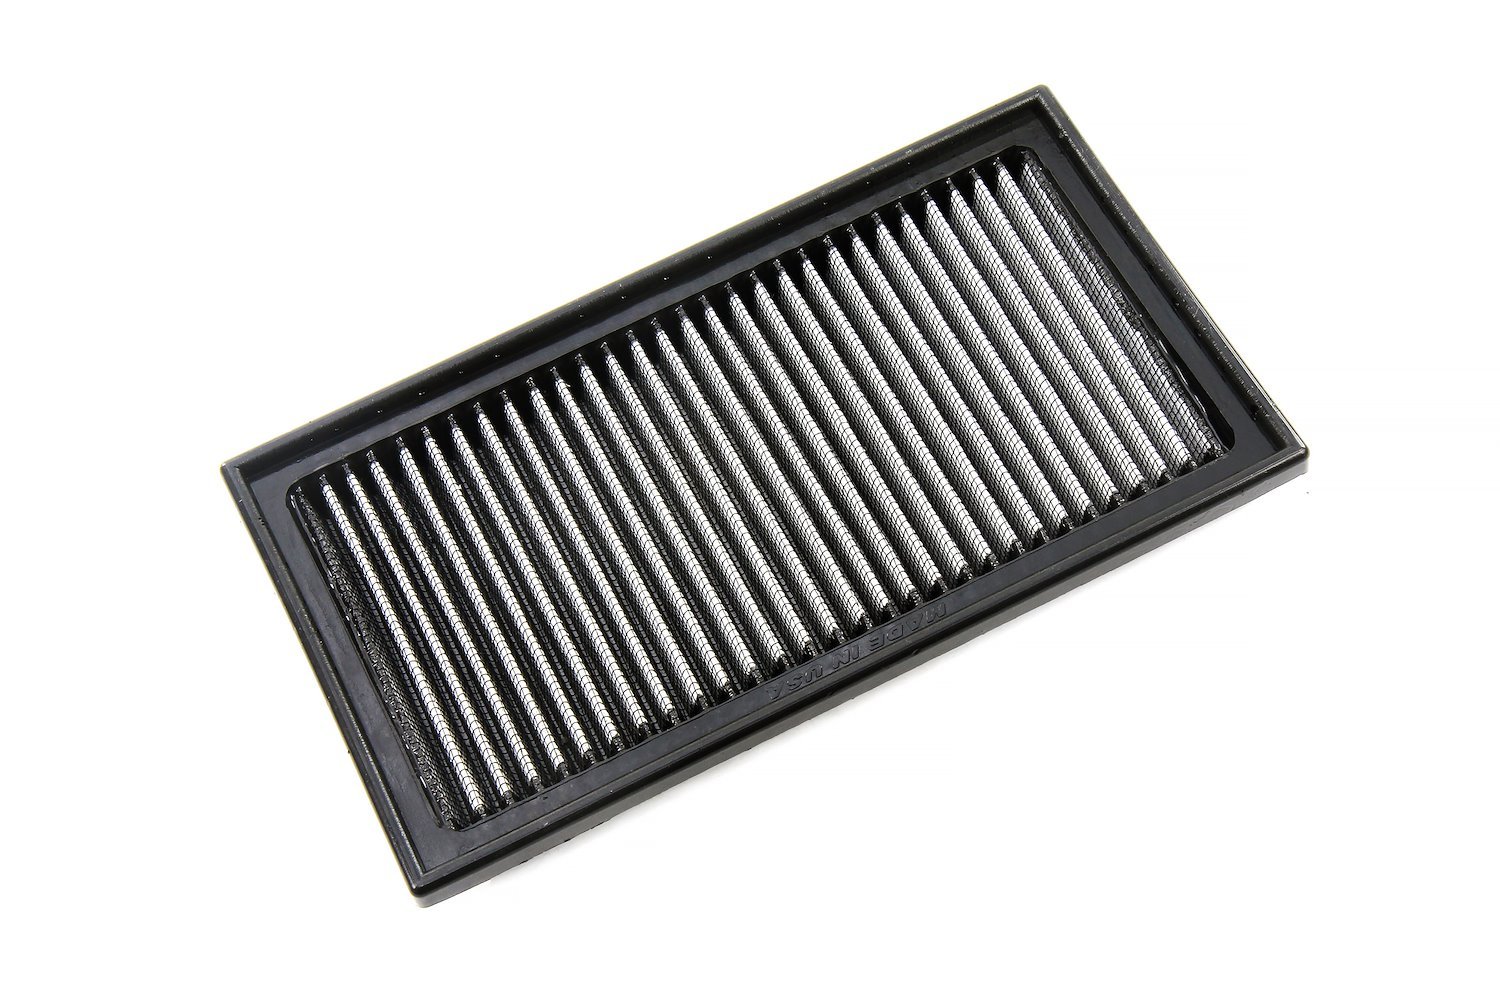 HPS-457379 Performance Drop-In Air Filter, Directly Replaces OEM Drop-In Panel Filter, Improves Performance & Fuel Economy